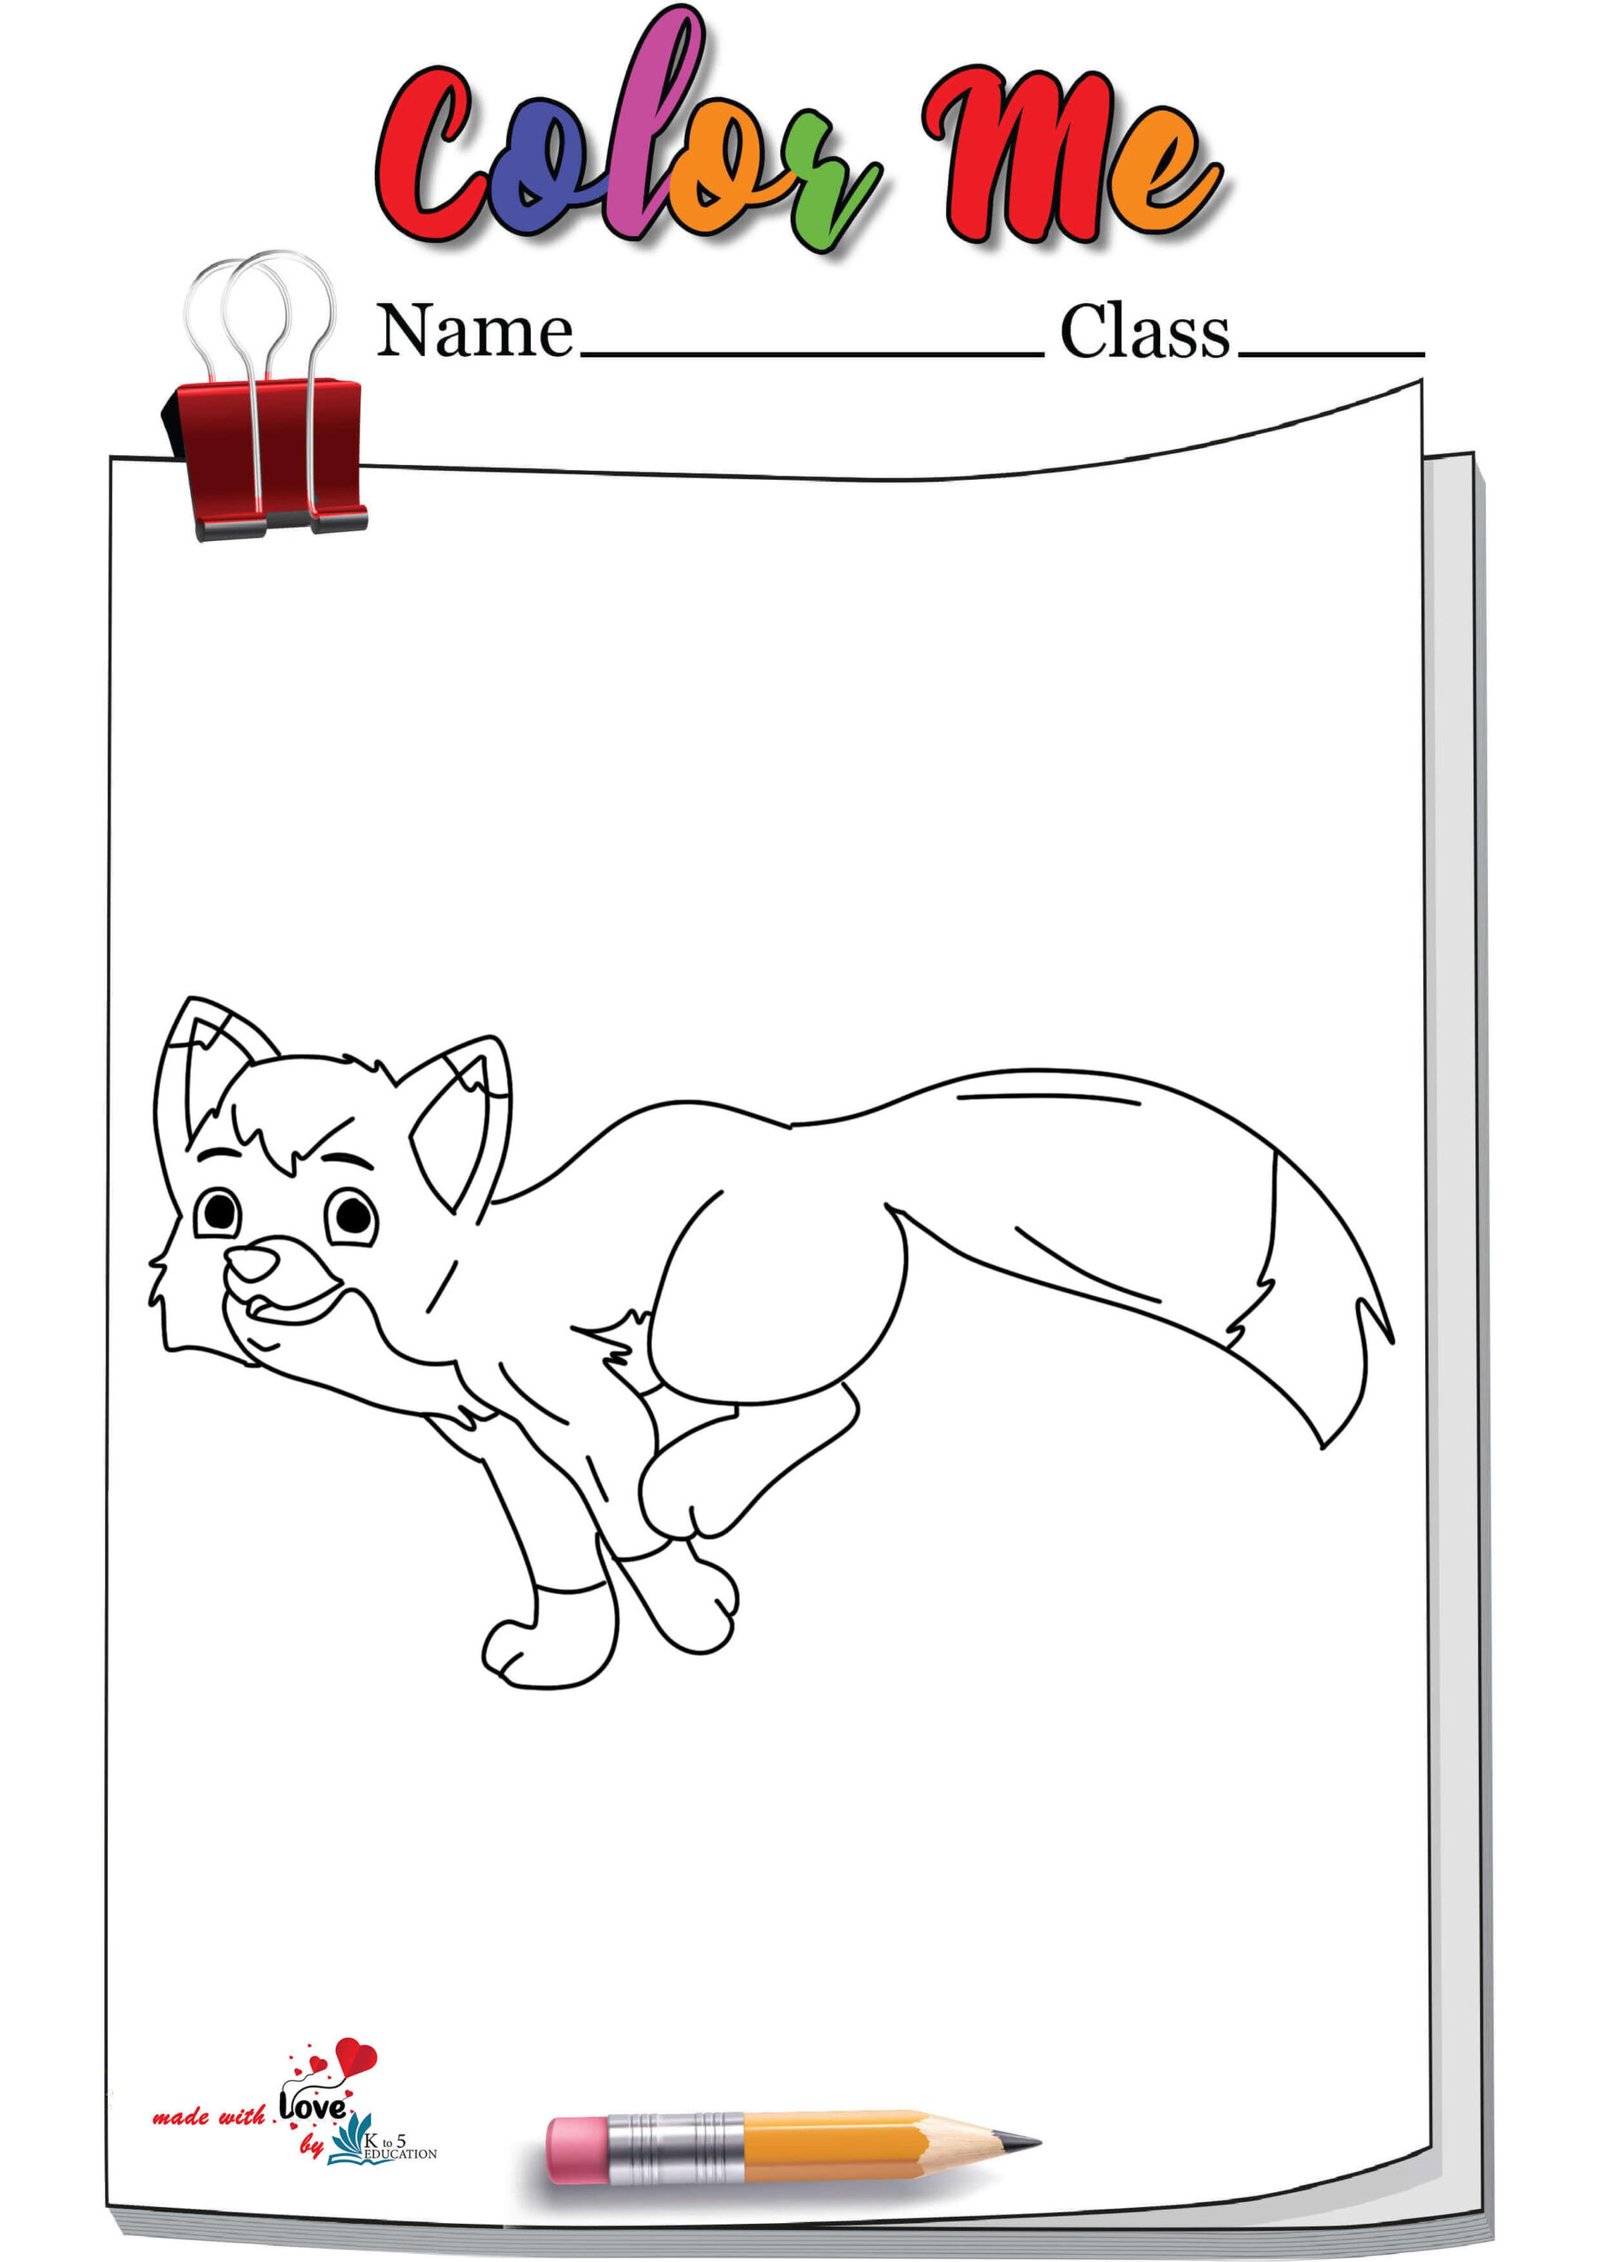 Jumping Fox Coloring Page